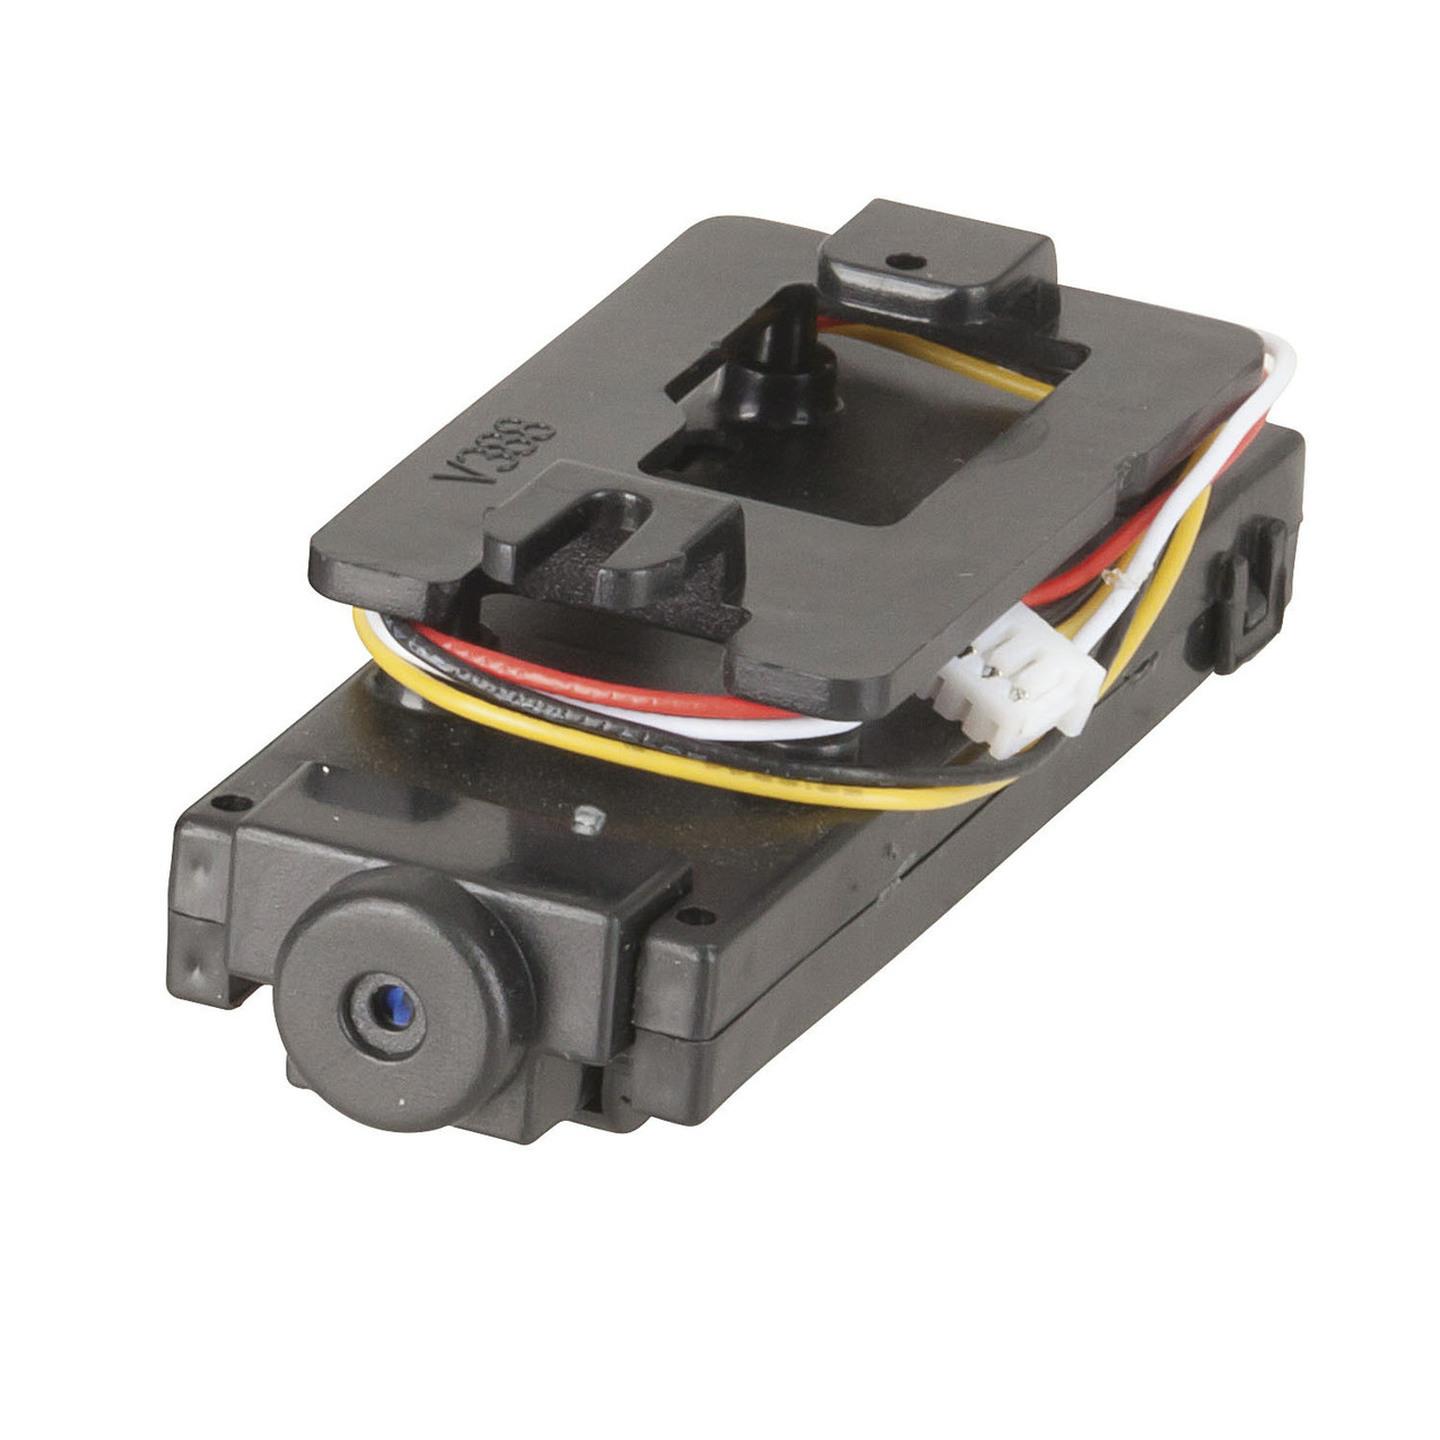 720P High Definition Video Recorder Module to suit GT3810 GT3820 and GT3895